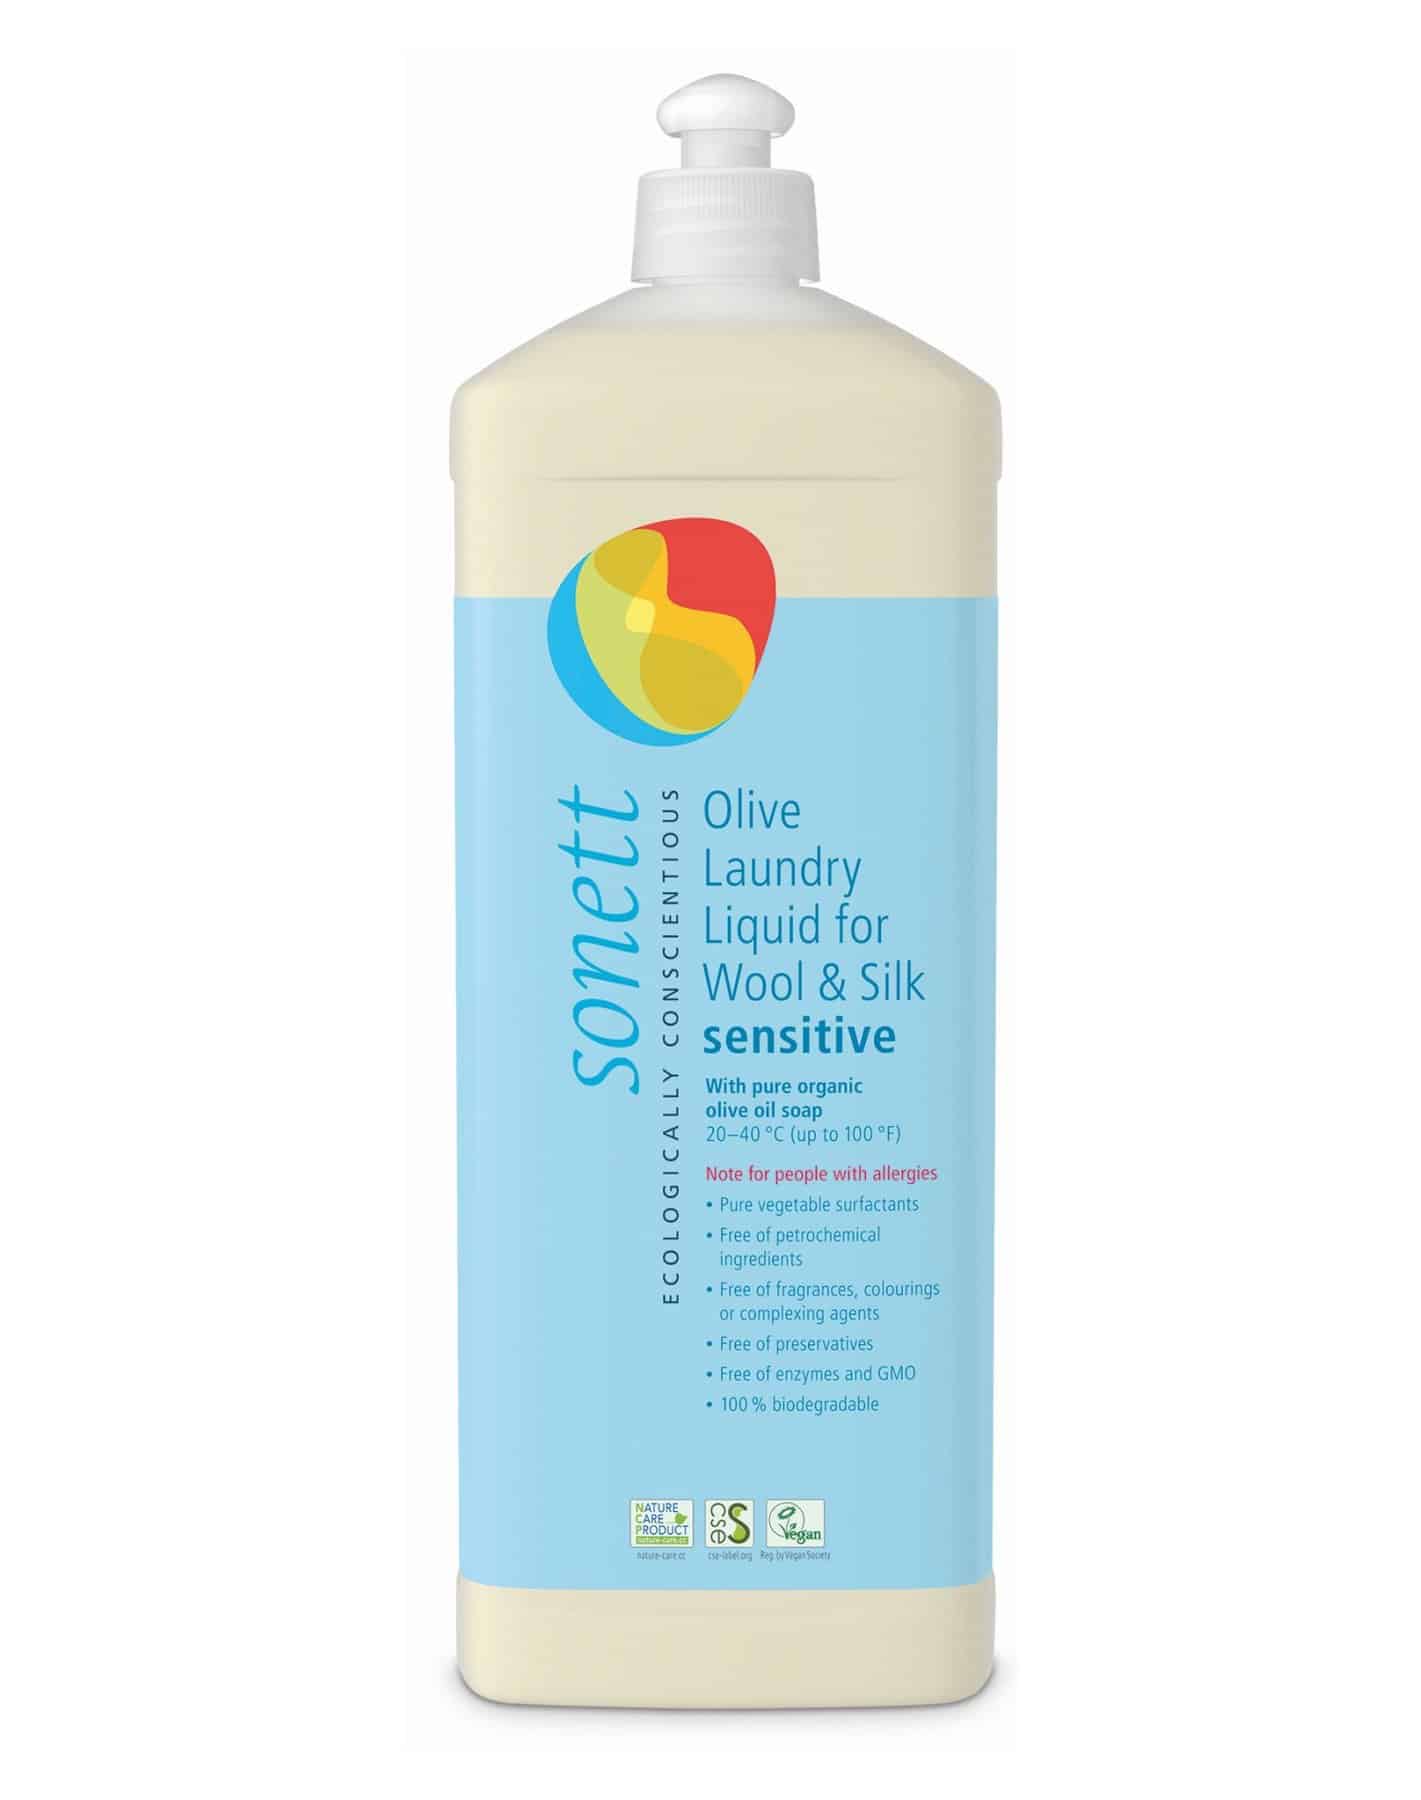 Sonett Olive Laundry Liquid for Wool and Silk Sensitive from gimme the good stuff